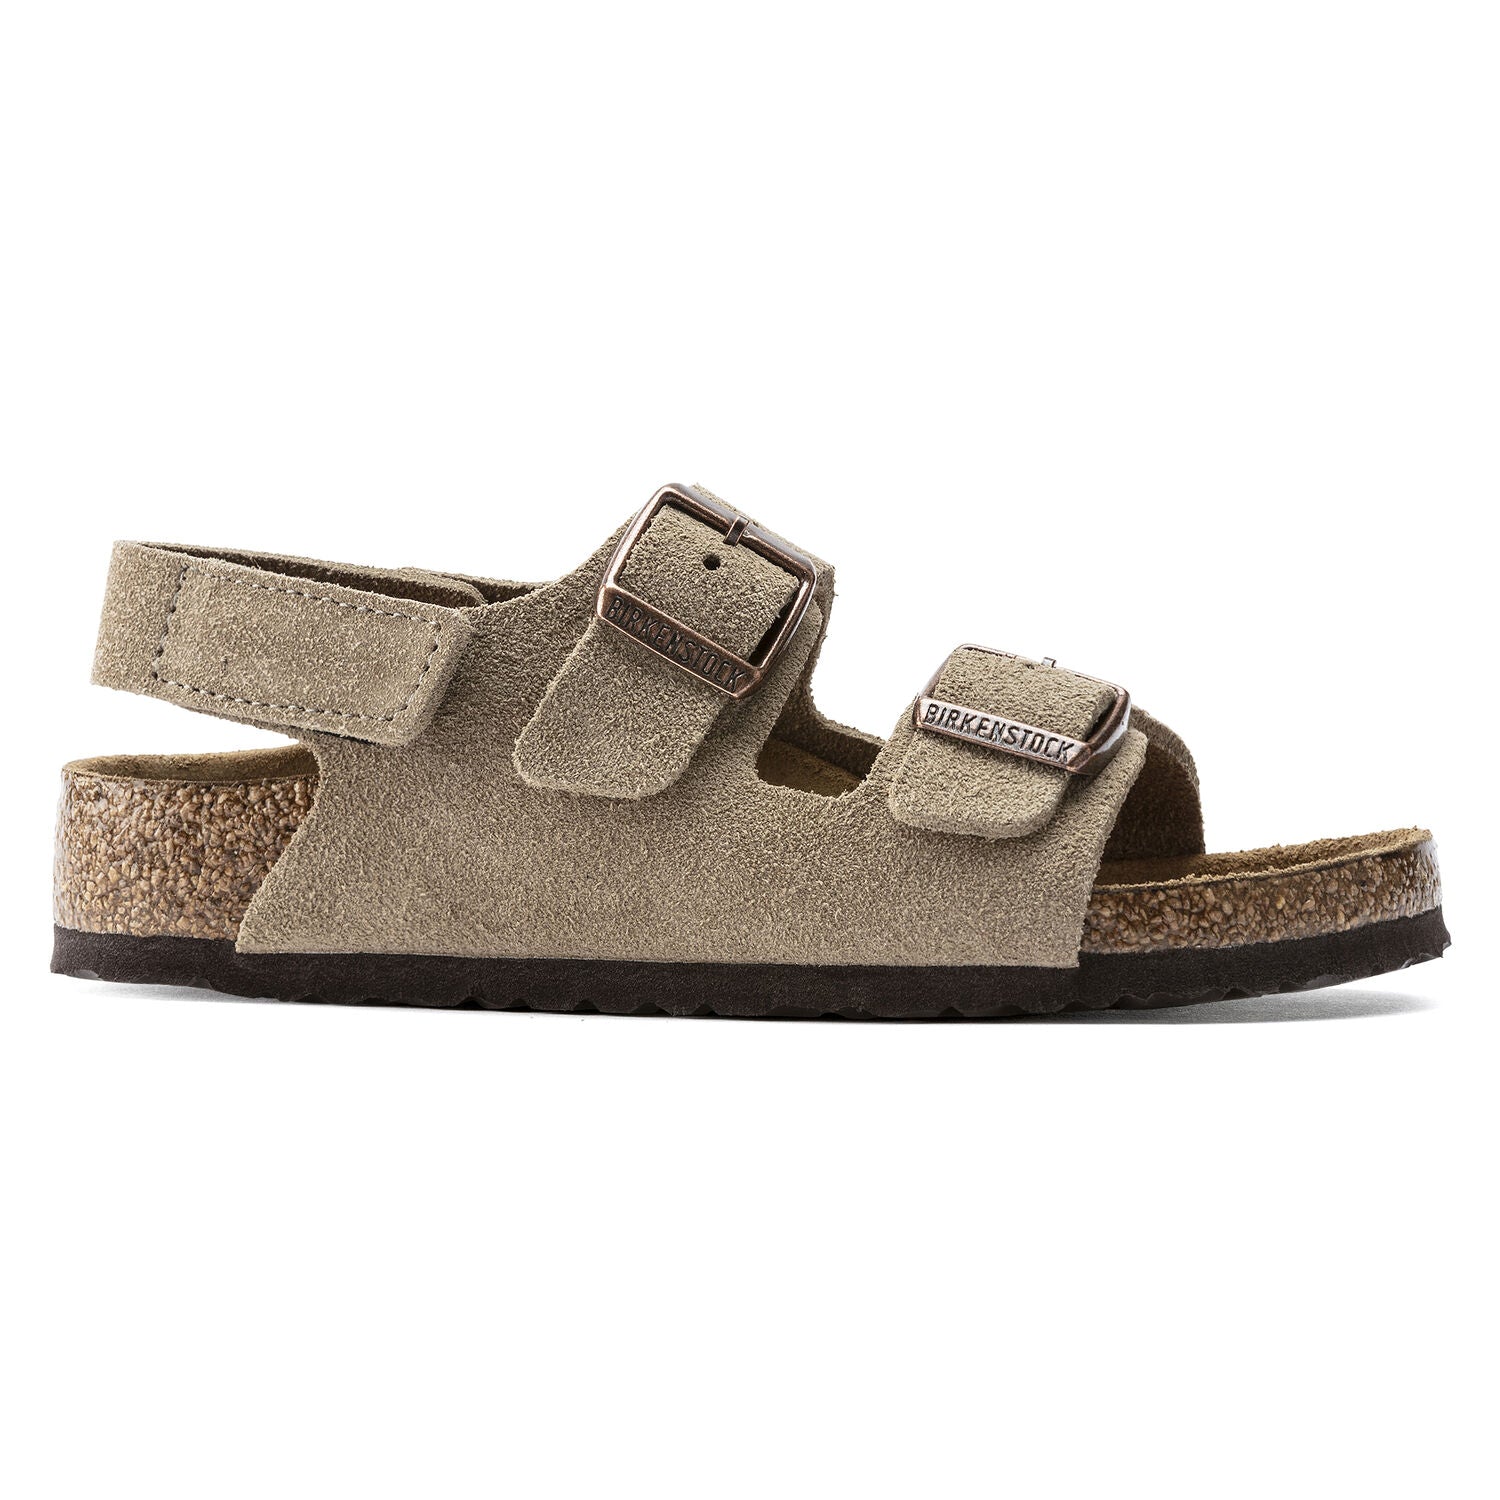 Boys & Girls Taupe Sandals